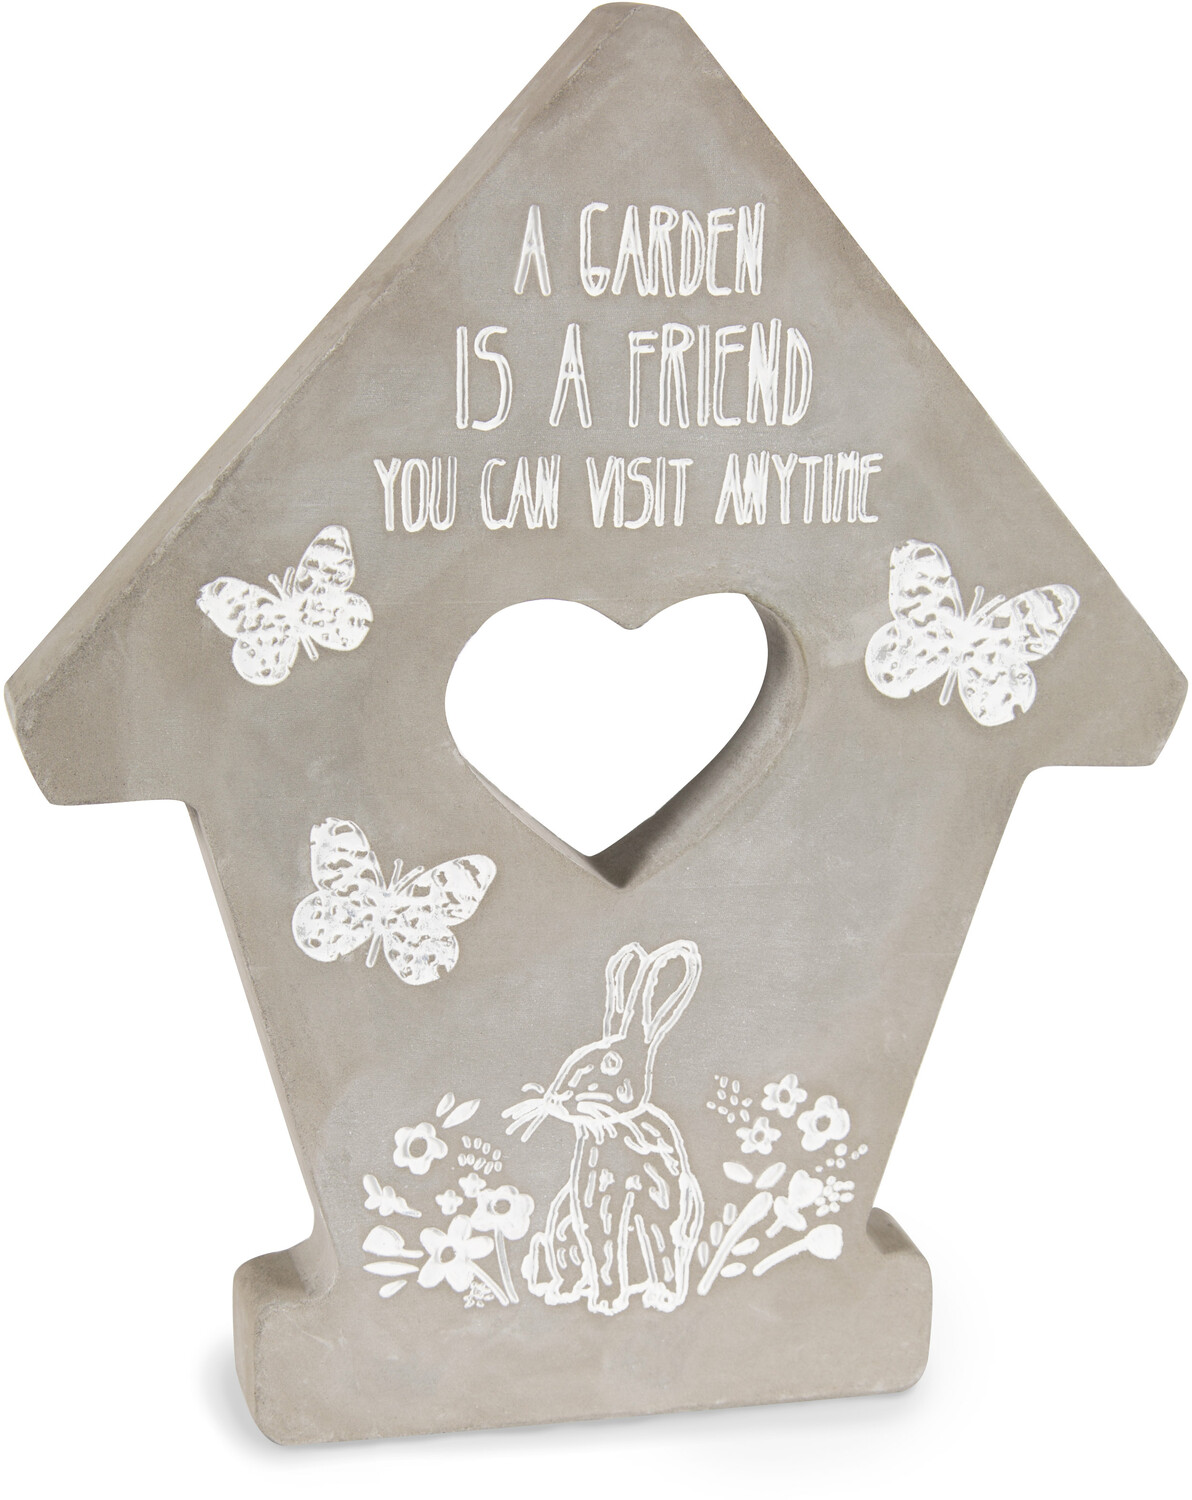 Friend by Bless My Bloomers - Friend - 7.5" Cement Stepping Stone